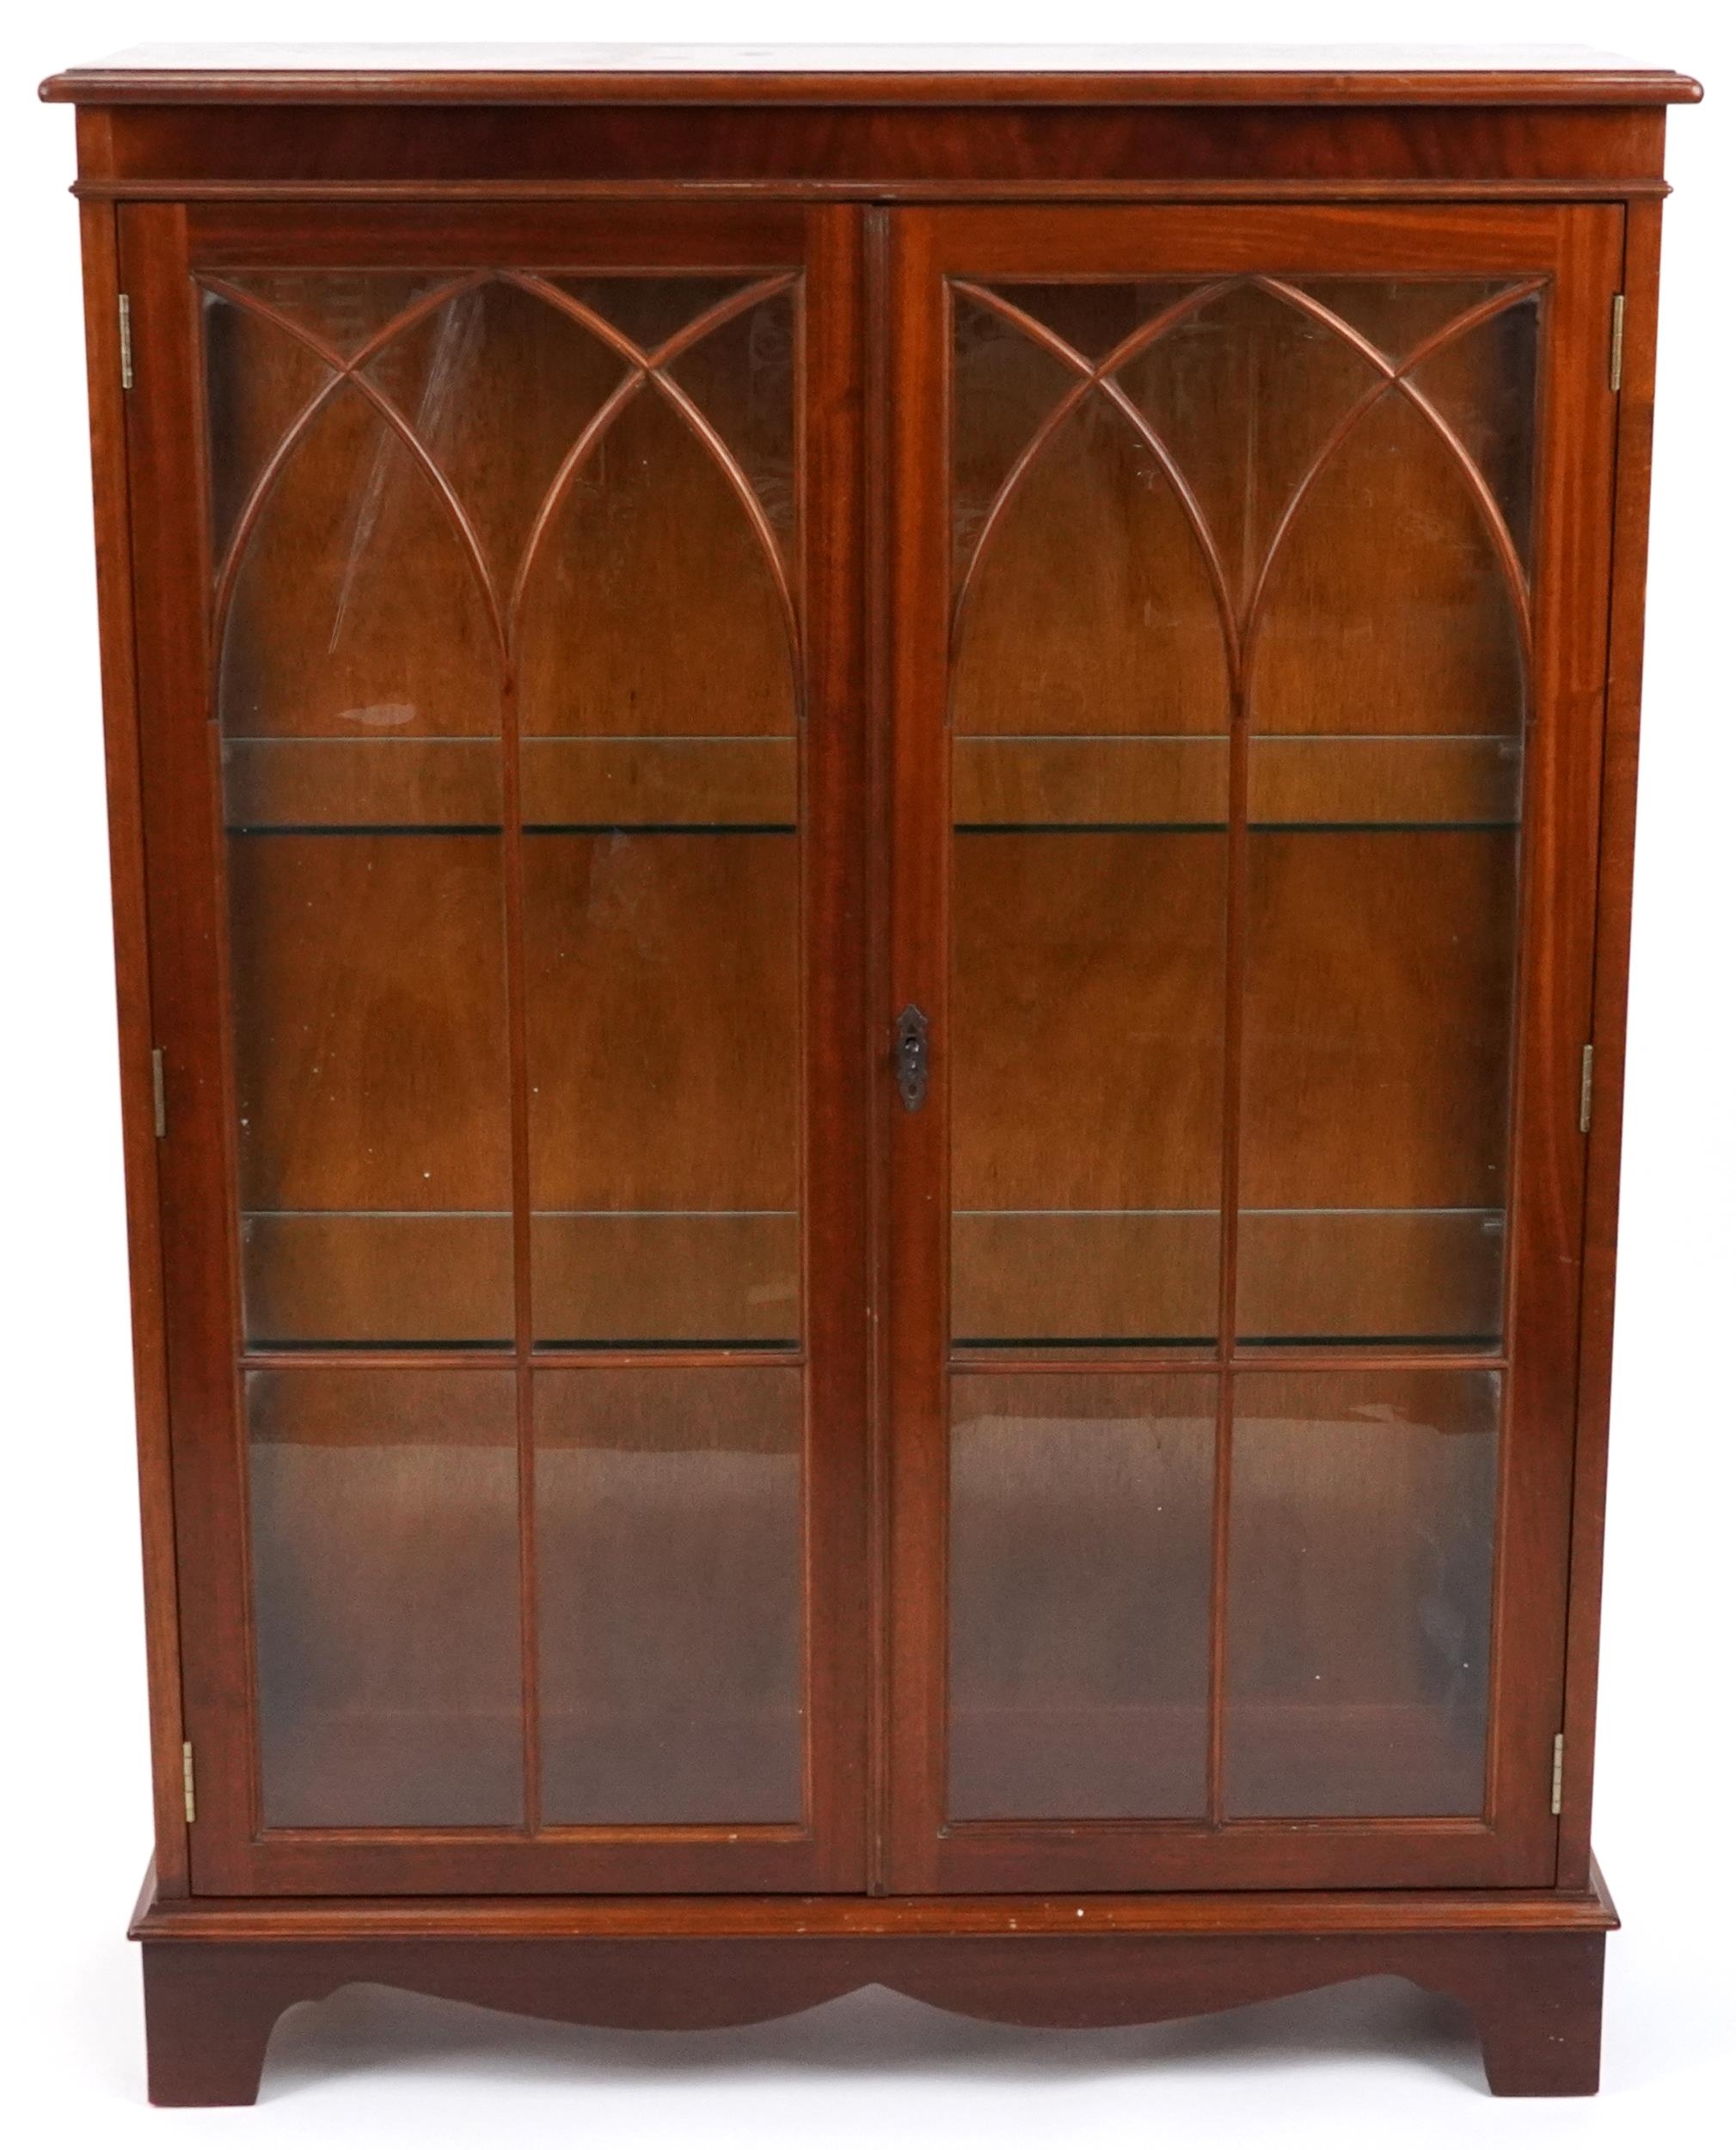 Mahogany two door display cabinet enclosing two glass shelves, 123.5cm H x 91cm W x 33cm D - Image 2 of 4